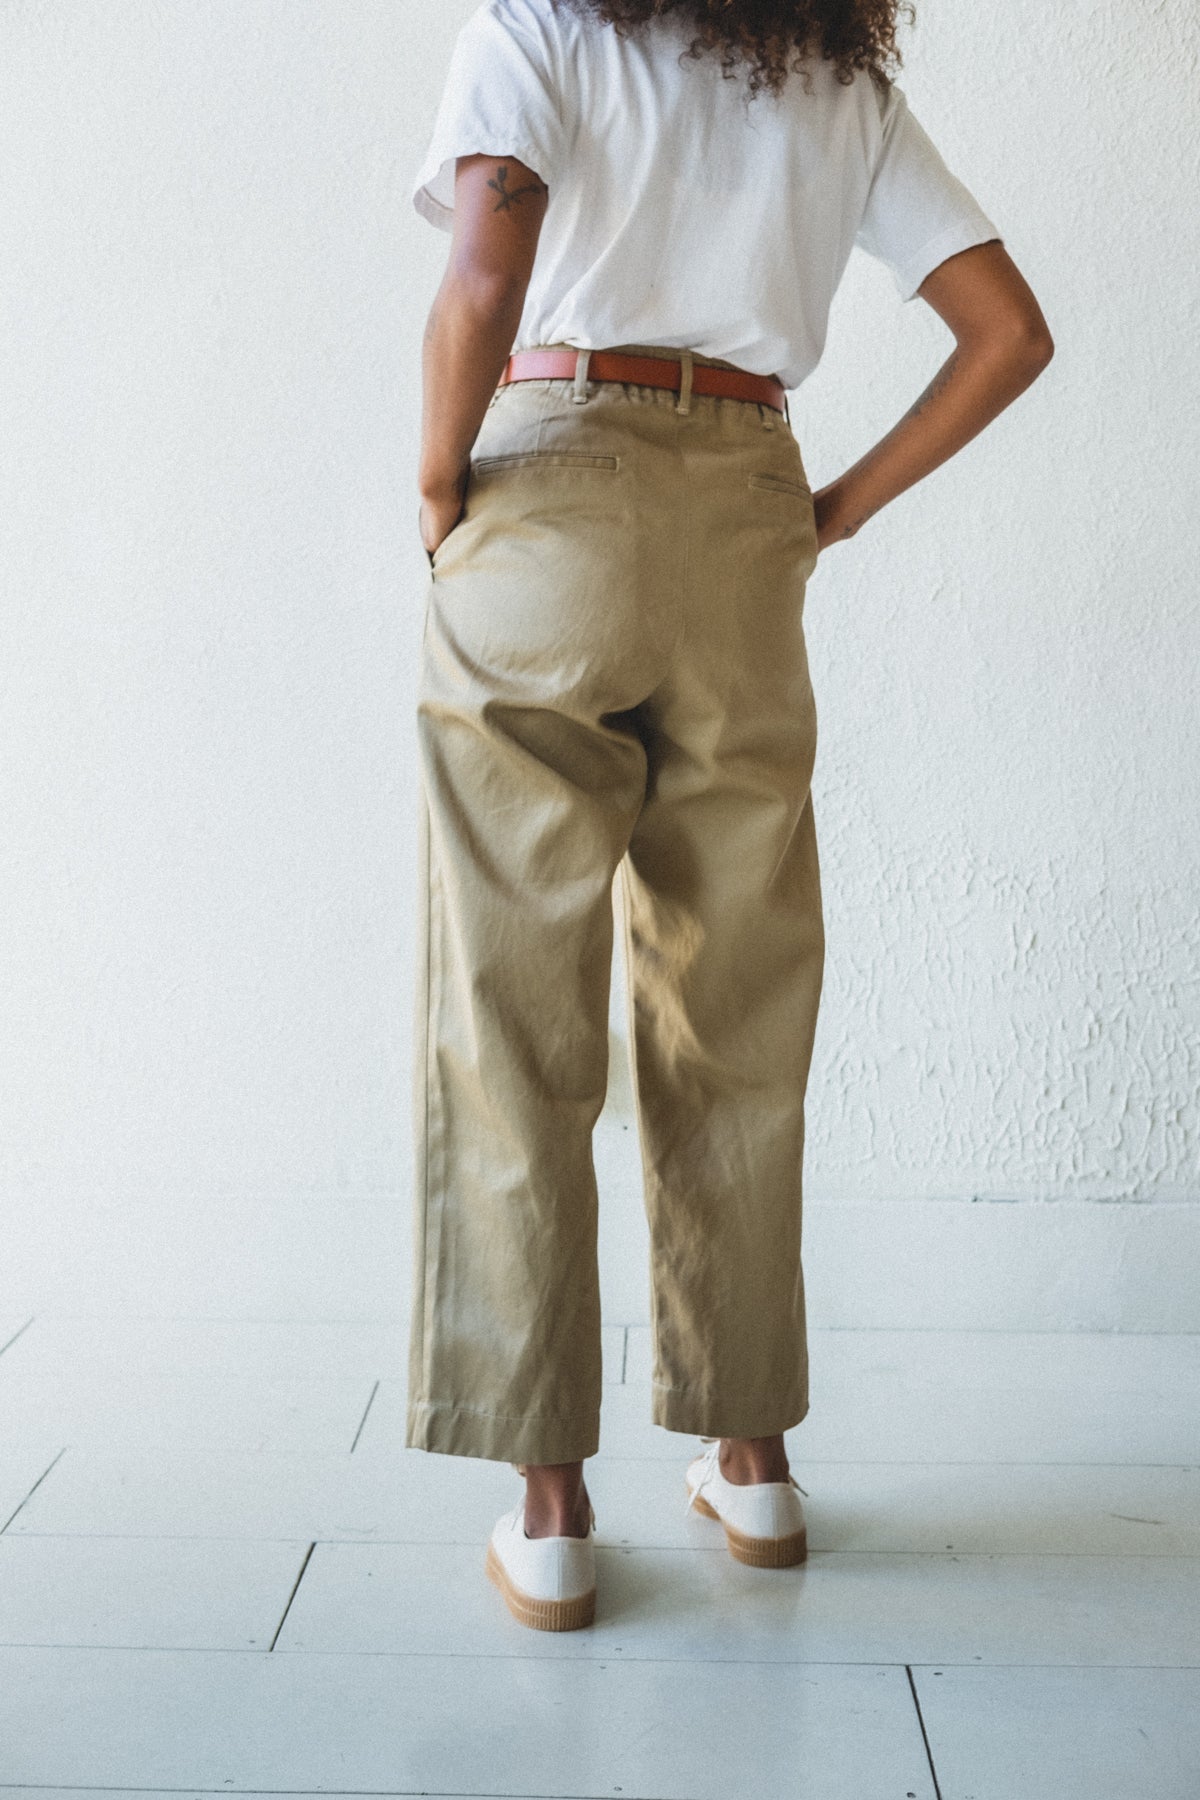 ARMY FIT TROUSER IN KHAKI